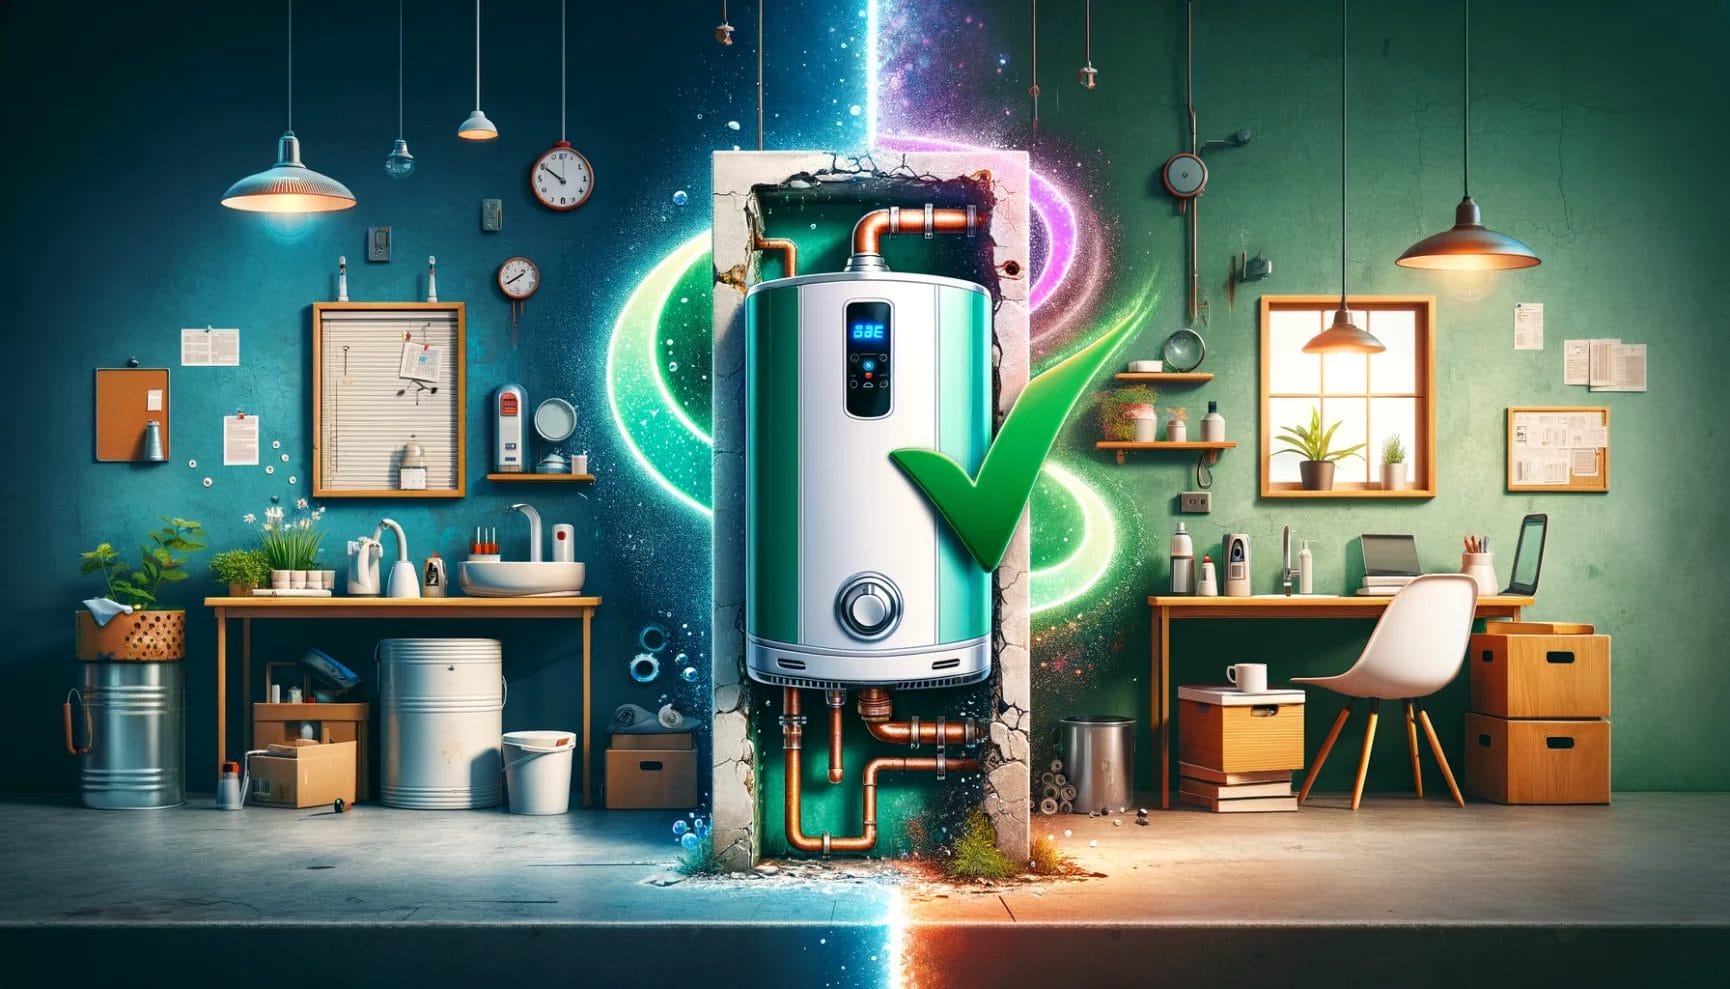 A whimsical illustration of a modern water heater transforming into a portal to a cosmic landscape in a creative office space.